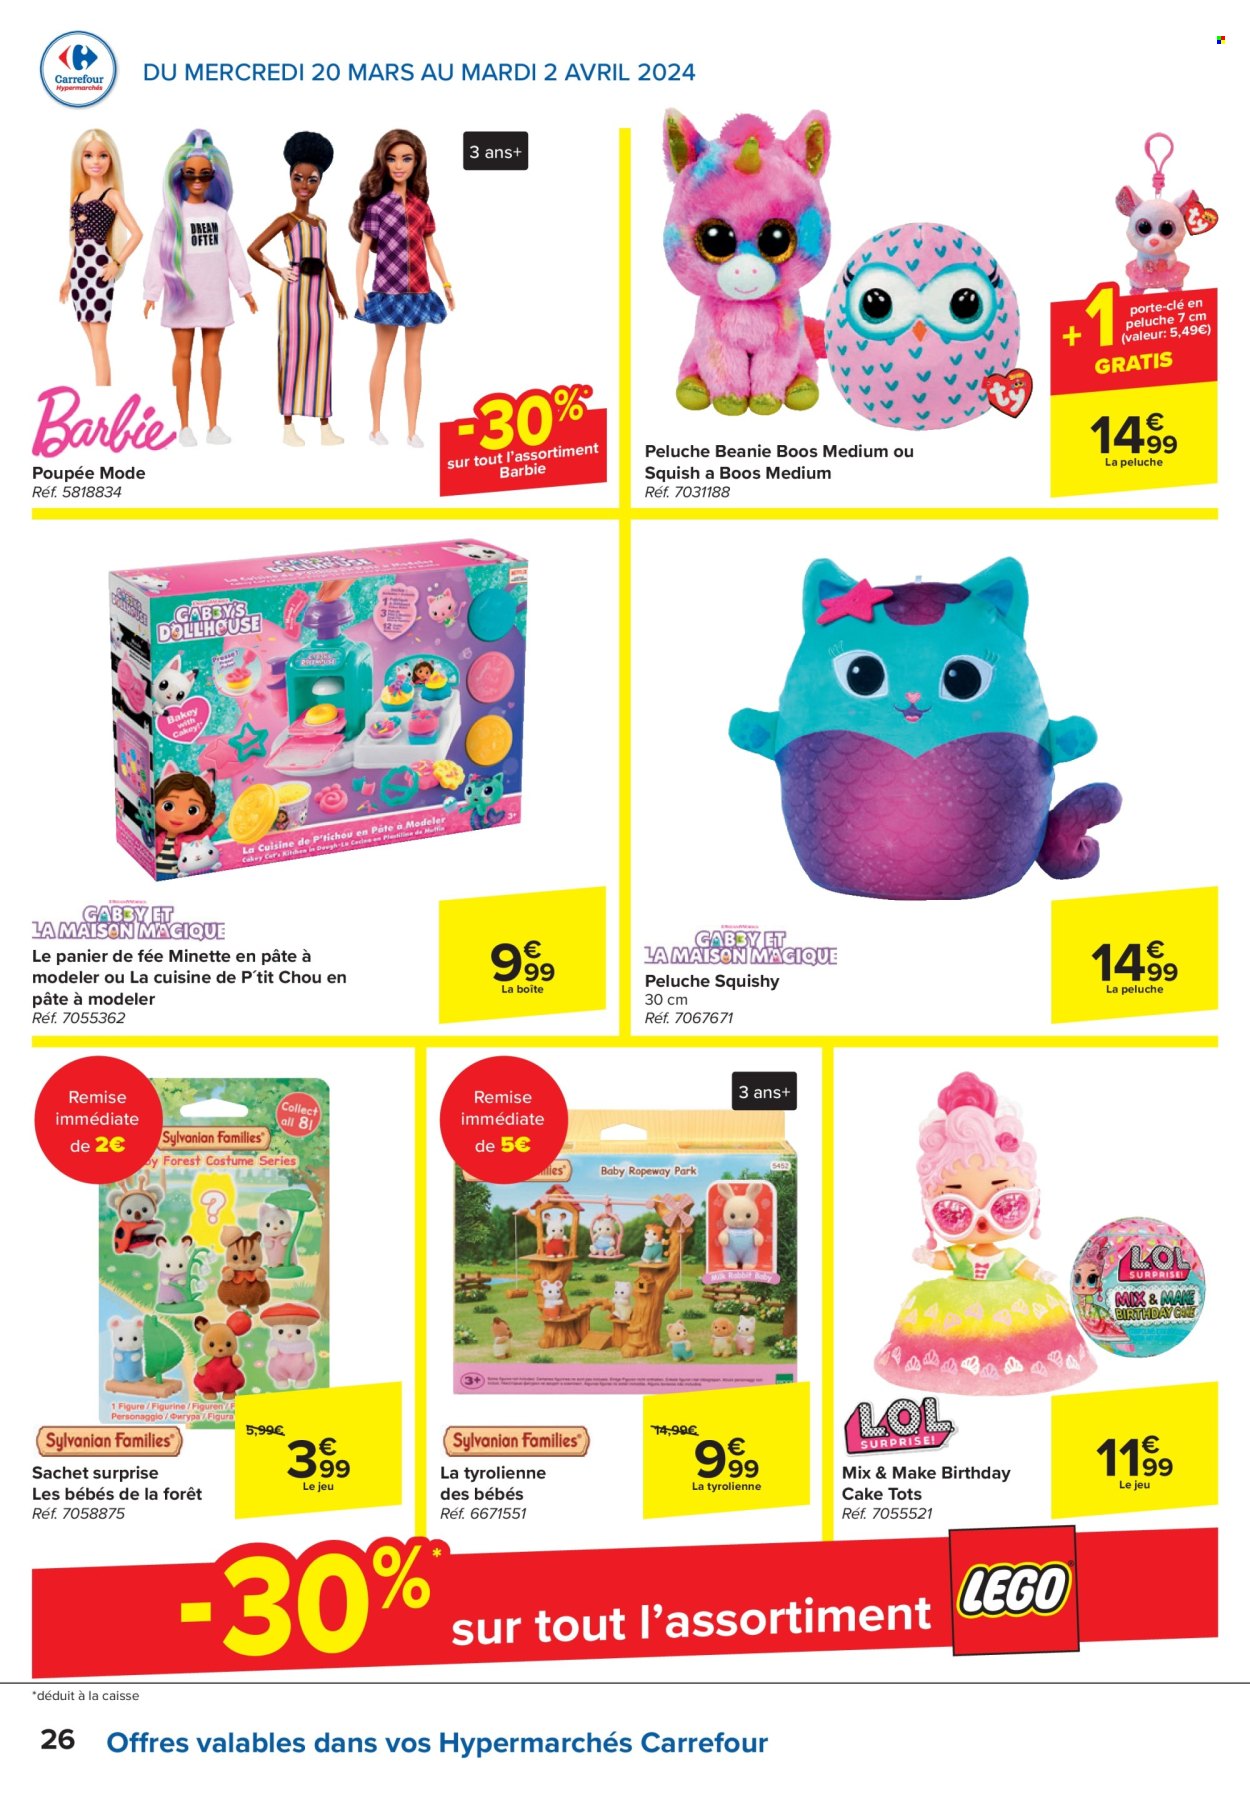 Catalogue Carrefour hypermarkt - 20.3.2024 - 2.4.2024. Page 26.